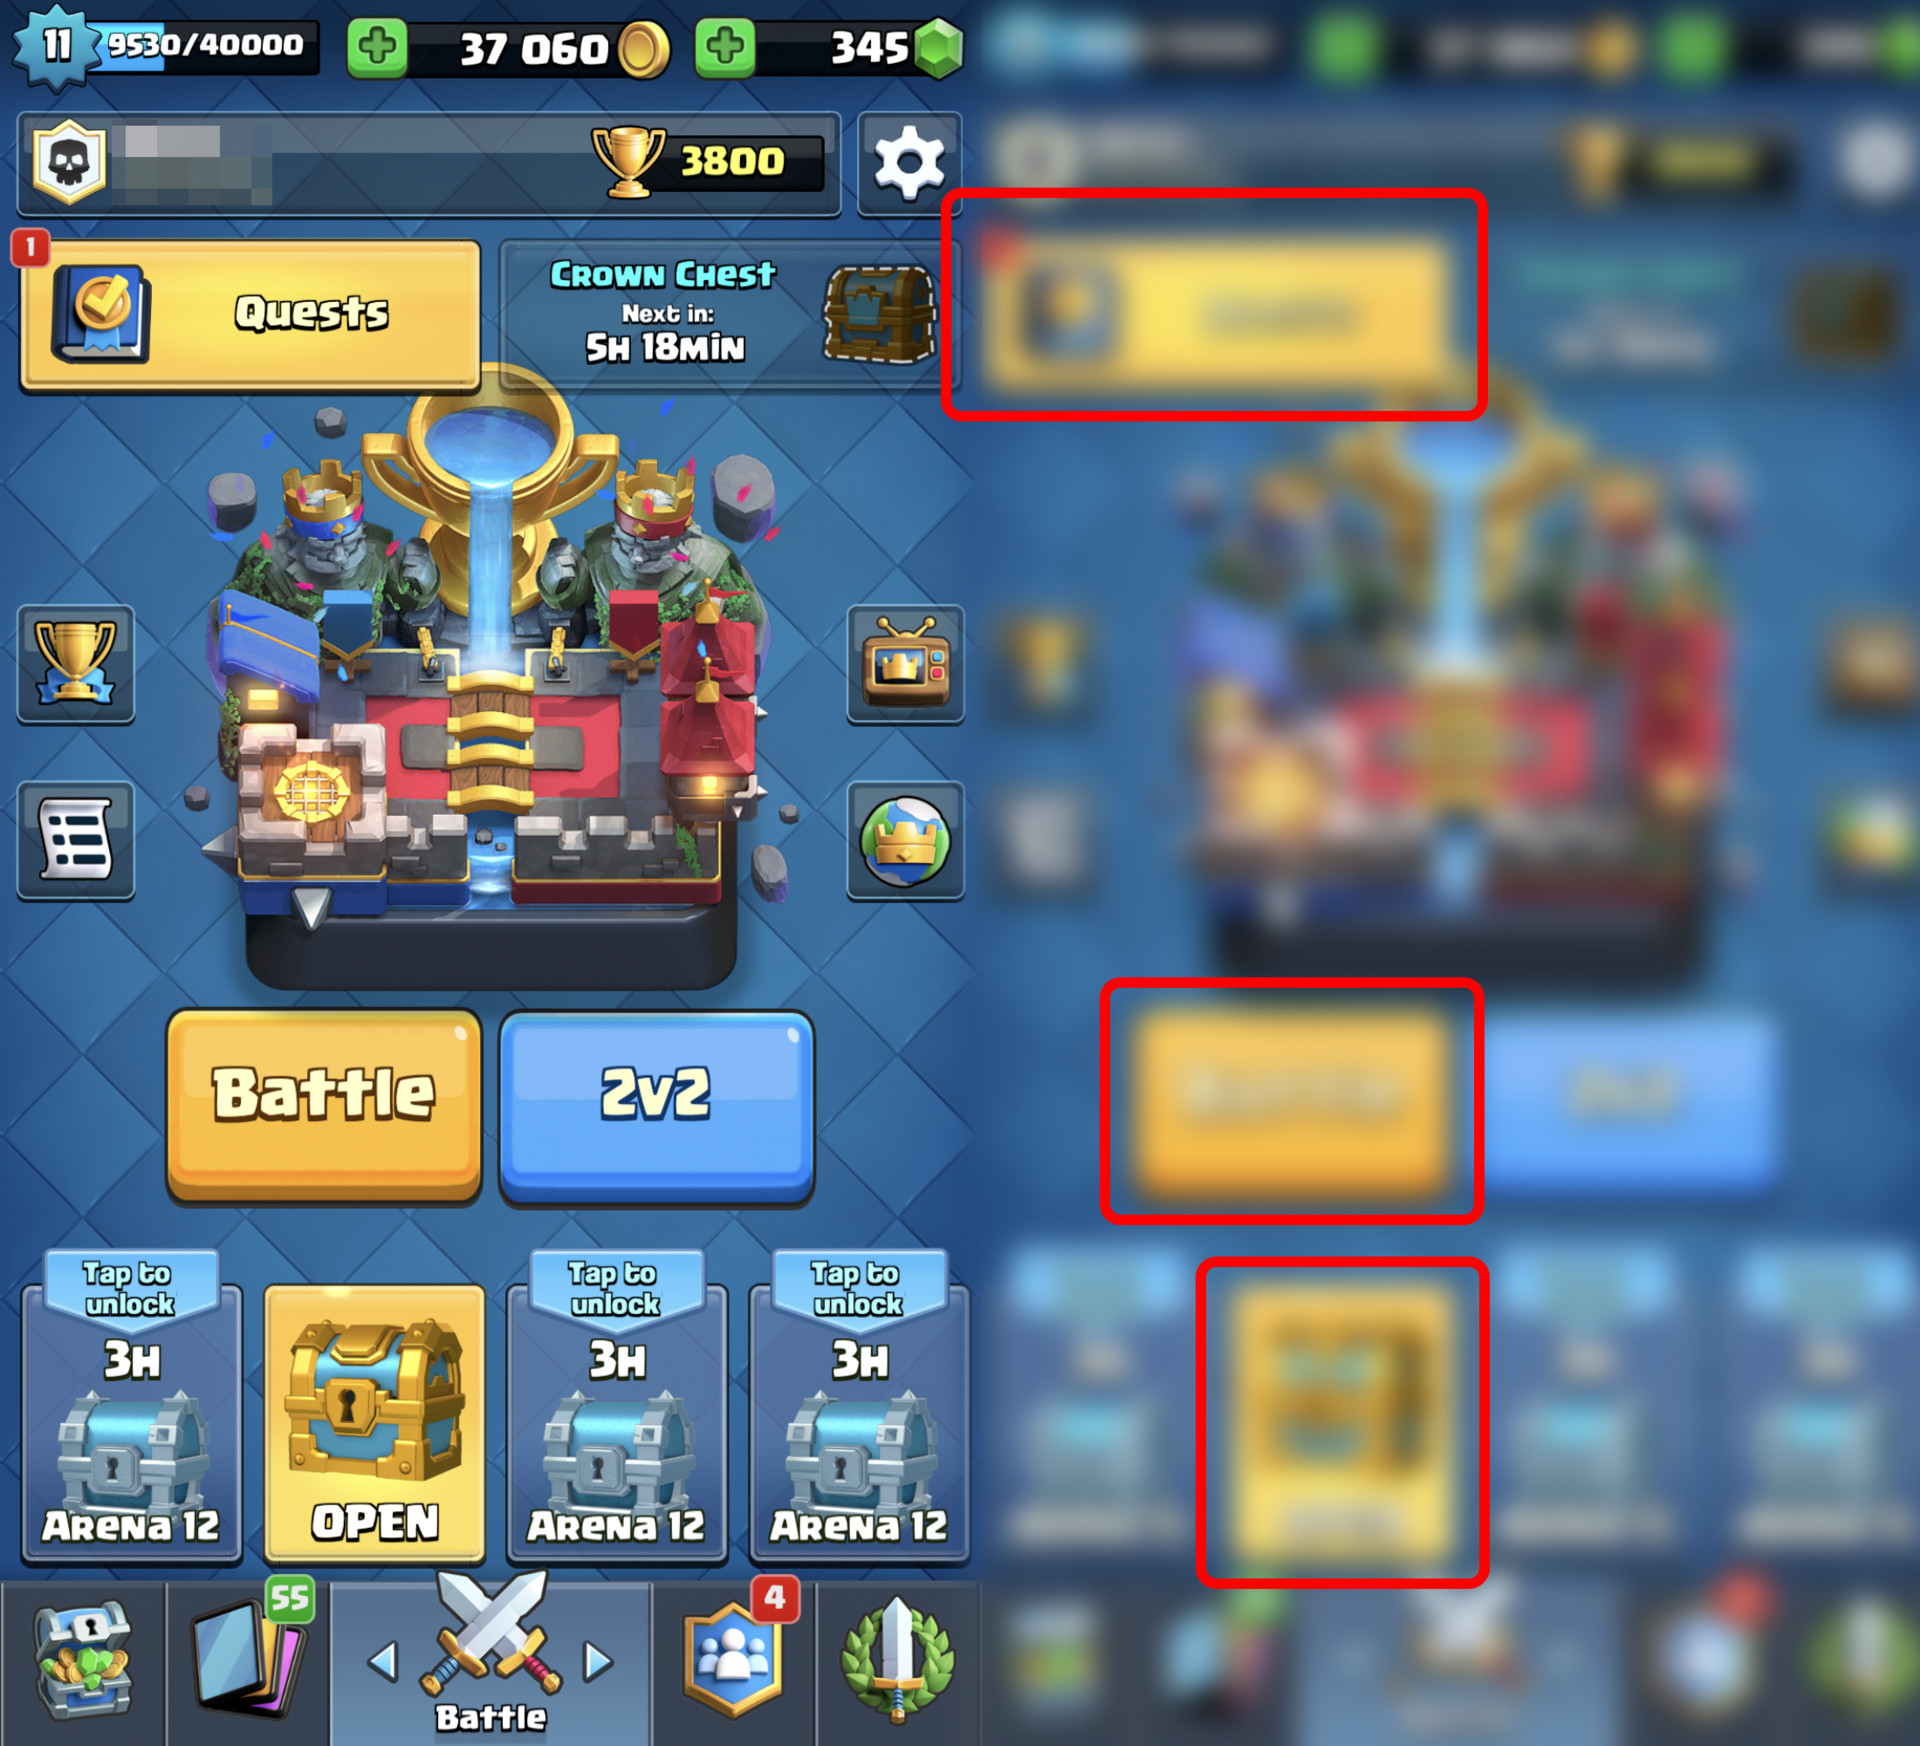 Experience in clash royal and roblox game in pc or mobile